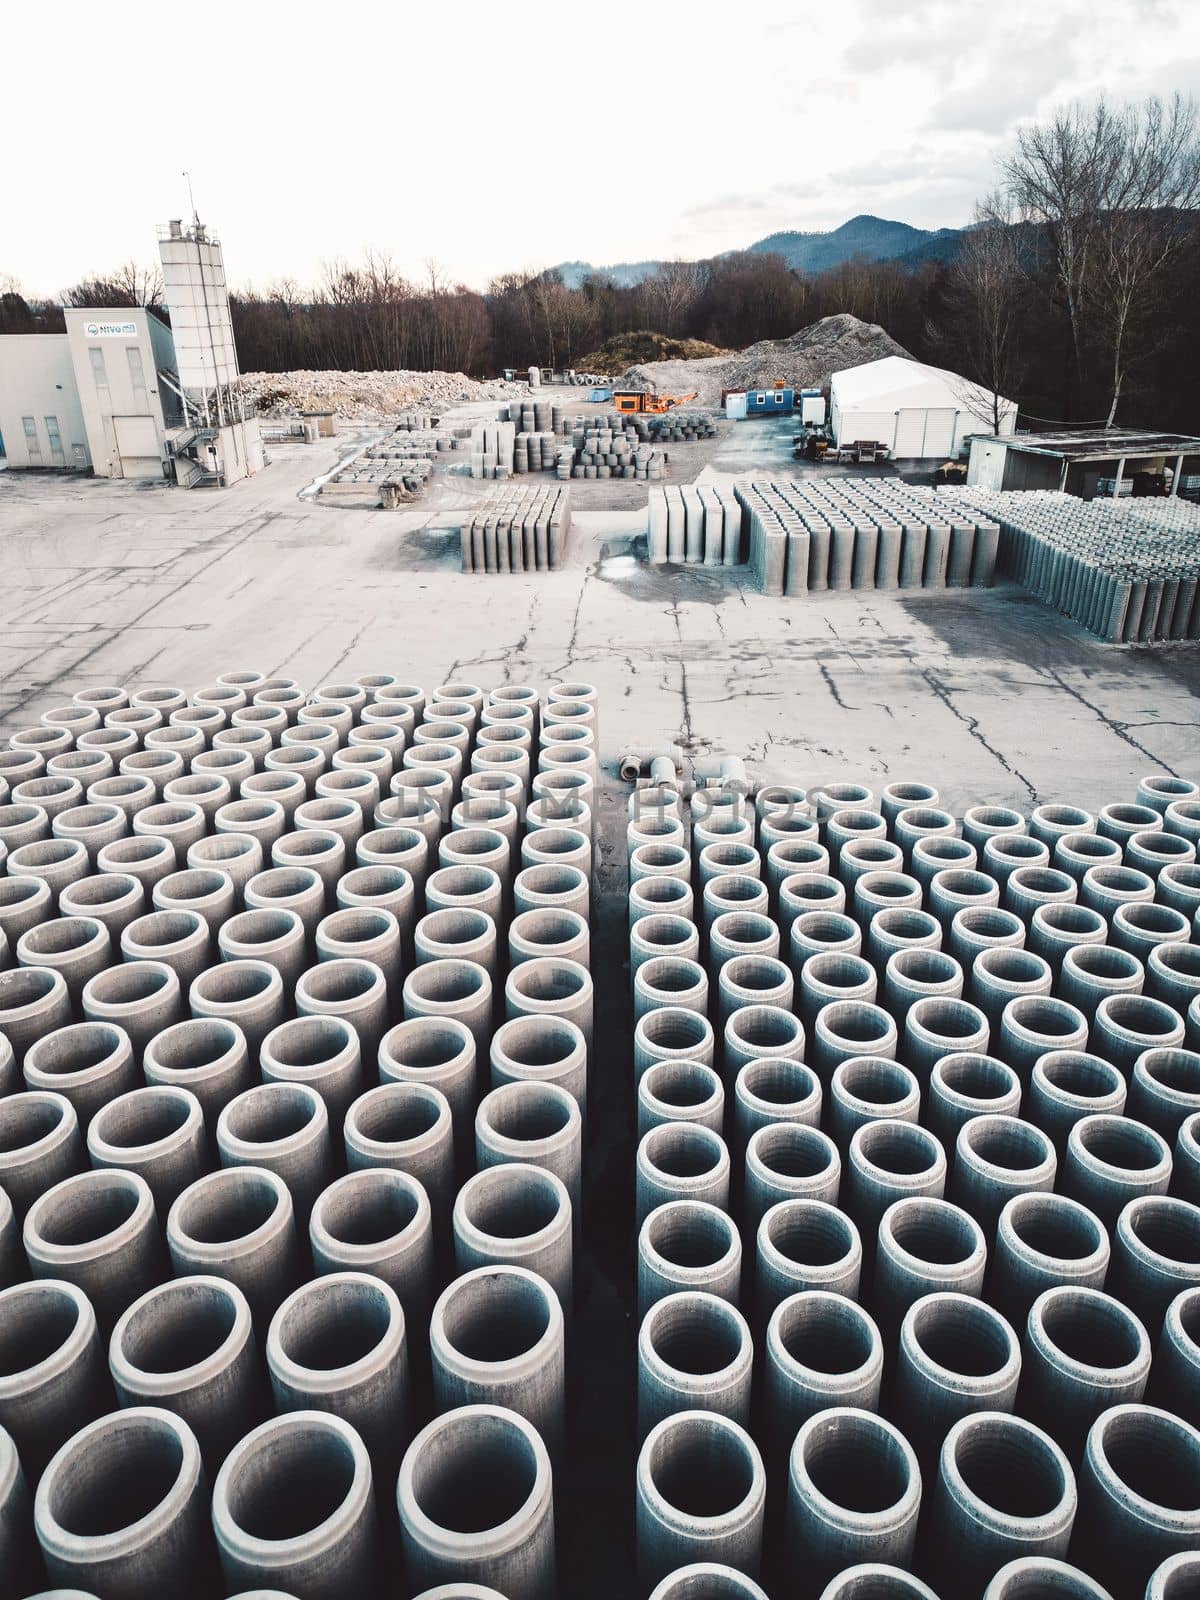 Vertical photo of construction company firm storage place with concrete pipes neatly lined up in rows on the grounds by VisualProductions